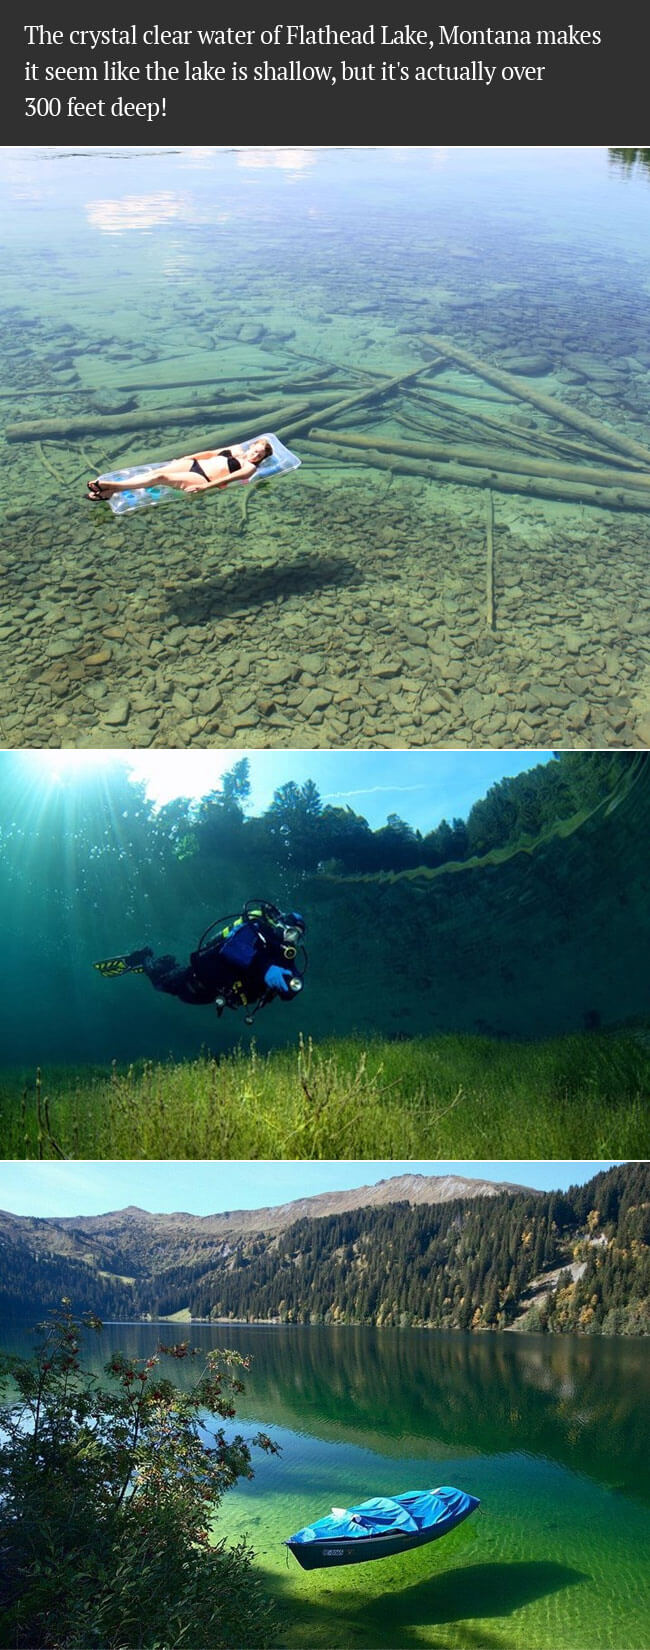 The crystal clear water of Flathead Lake, Montana makes it seem like the lake is shallow, but it's actually over 300 feet deep!